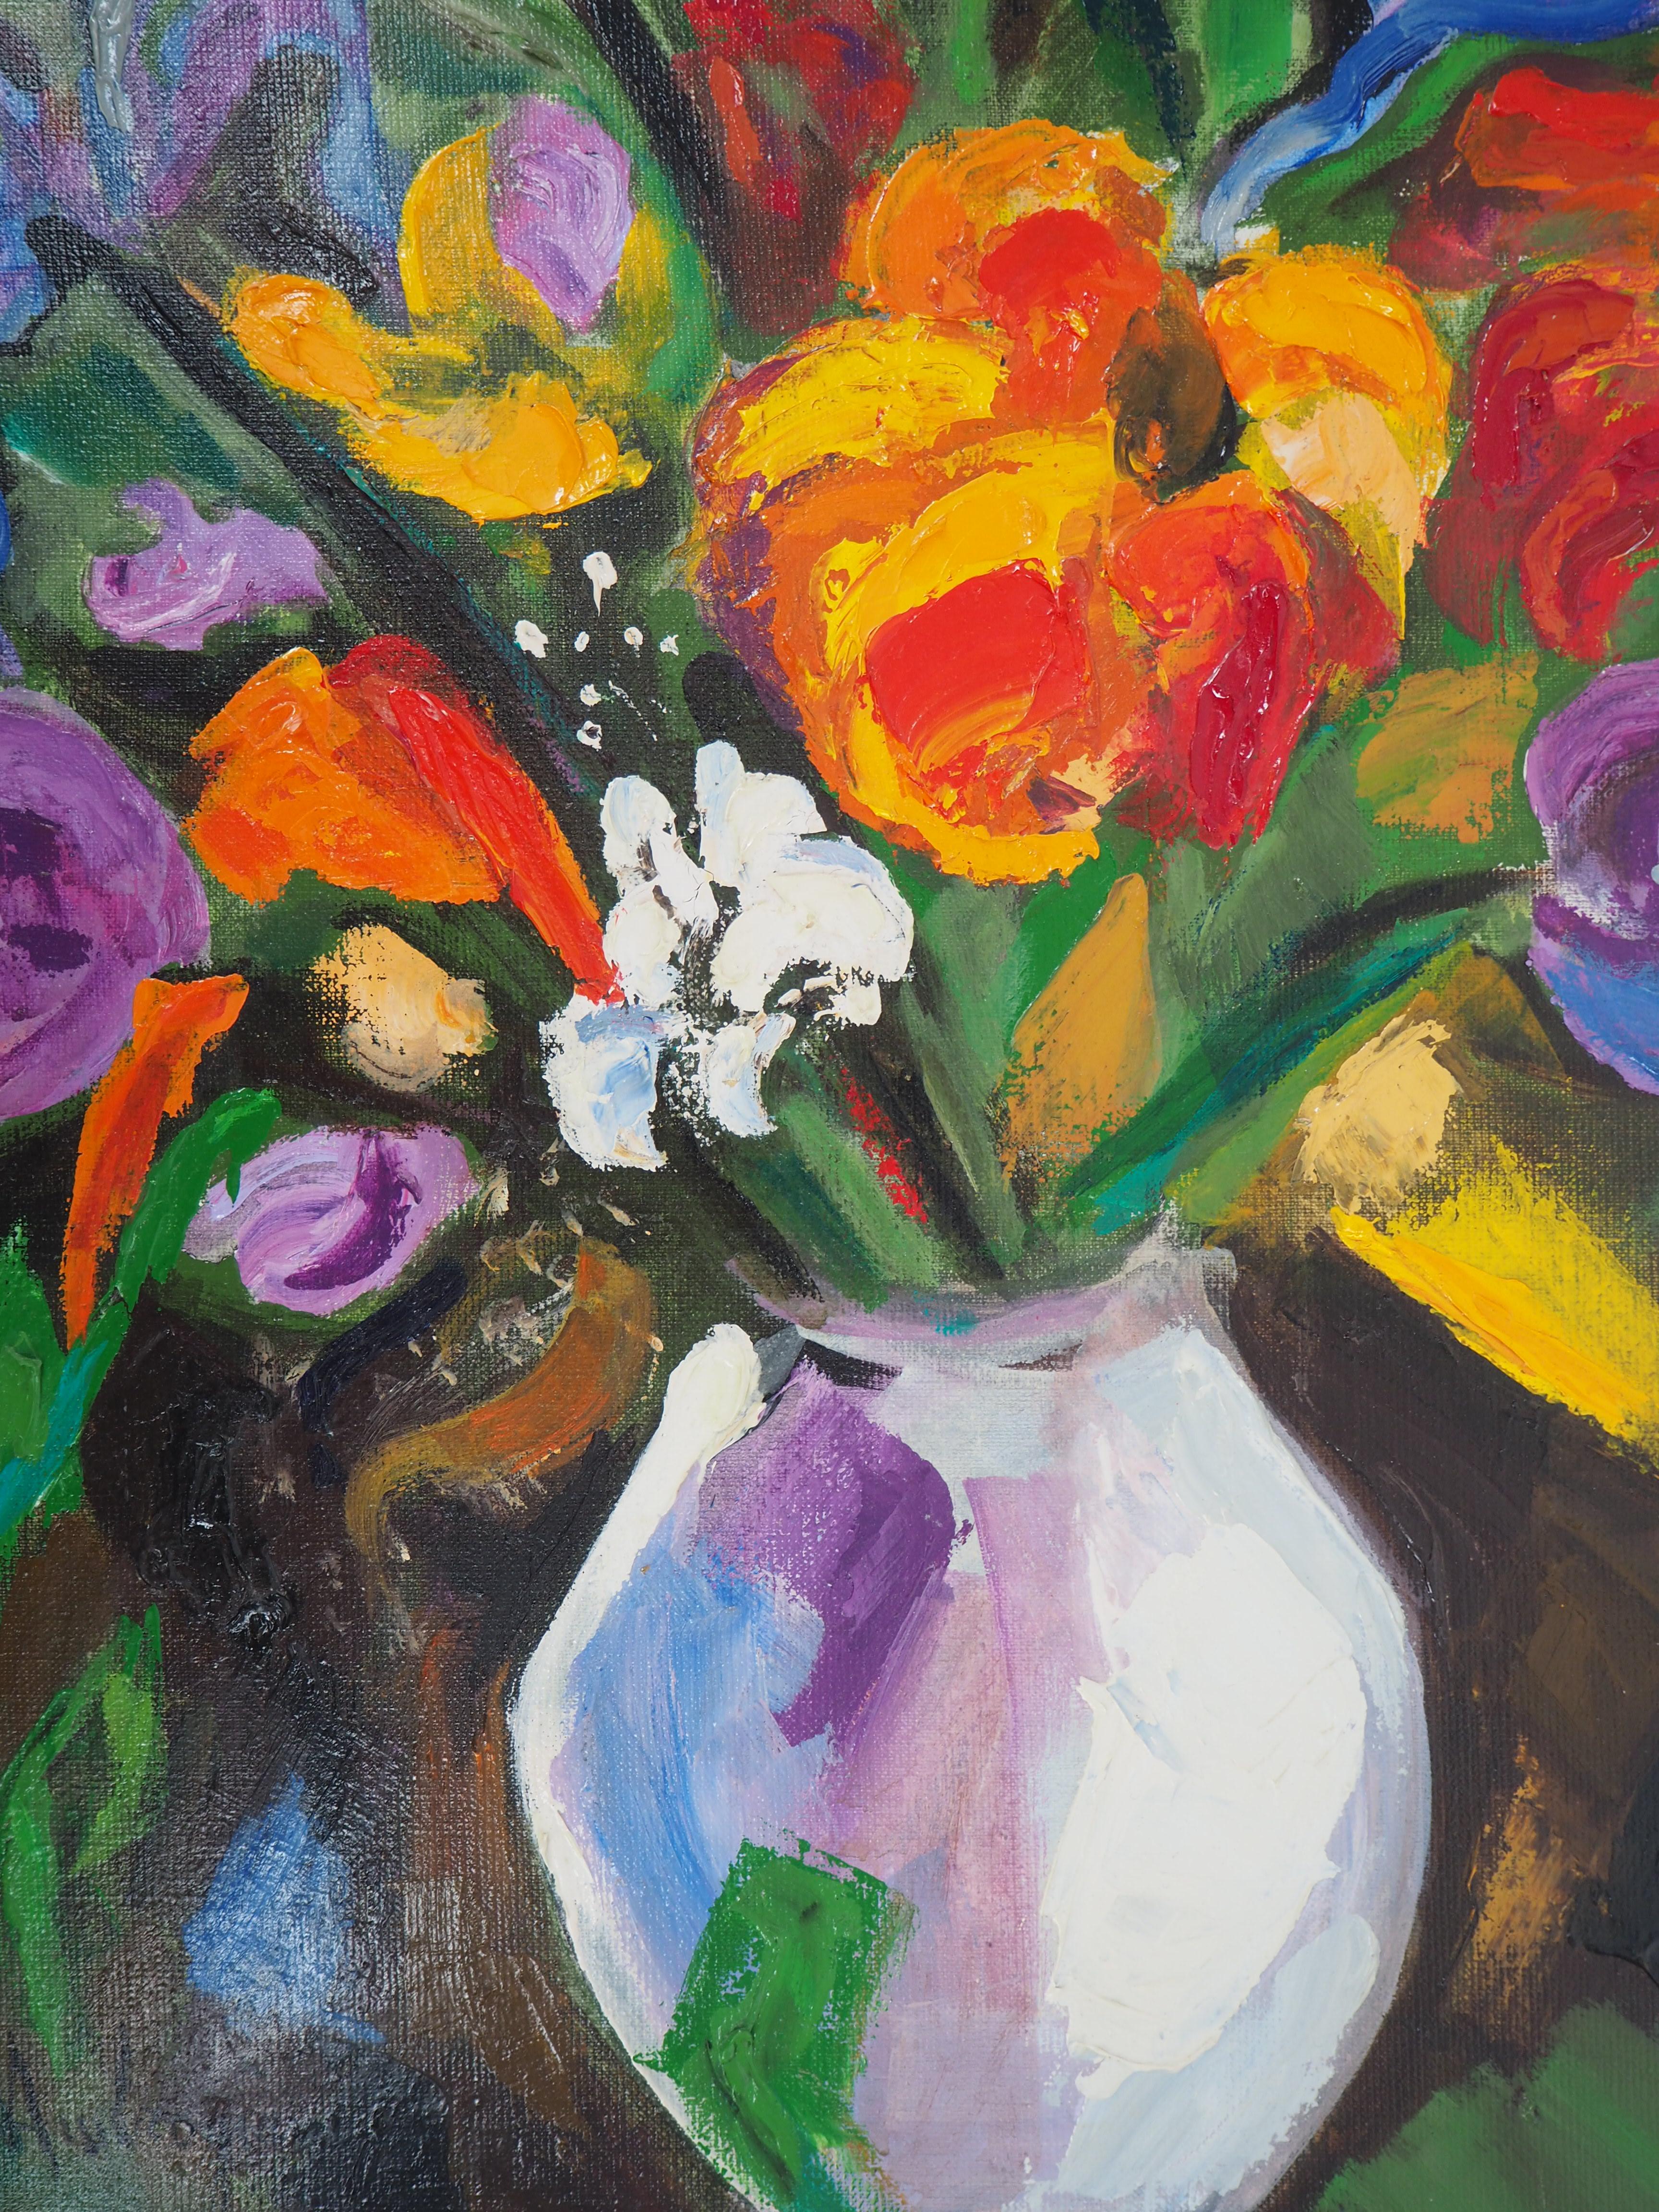 Bouquet of Tulips and Wild Flowers - Original Oil on Canvas, Signed - Modern Painting by Pascal Ambrogiani